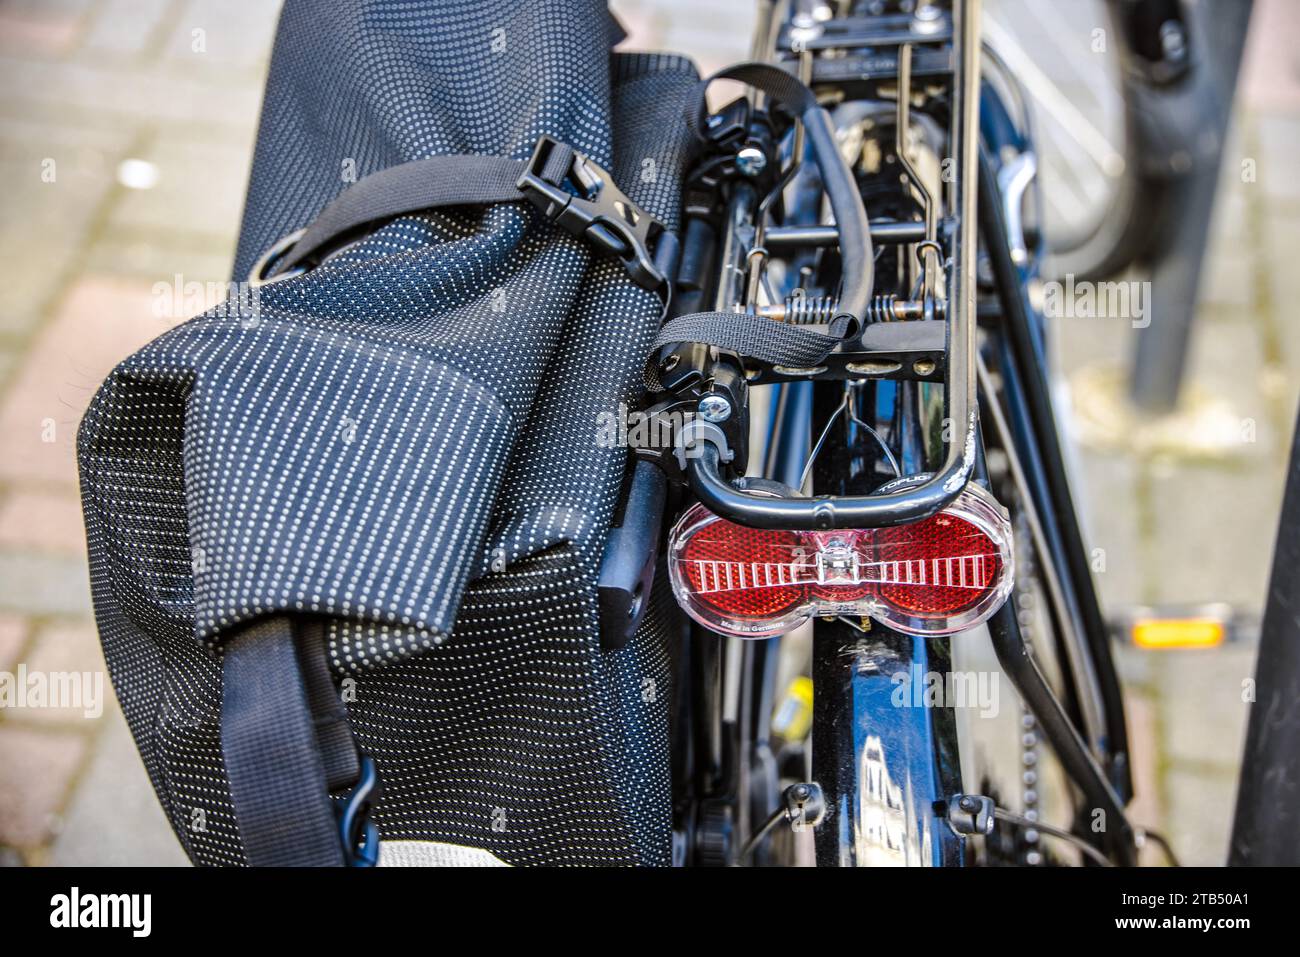 Bicycle bag on a luggage rack on a bicycle Stock Photo